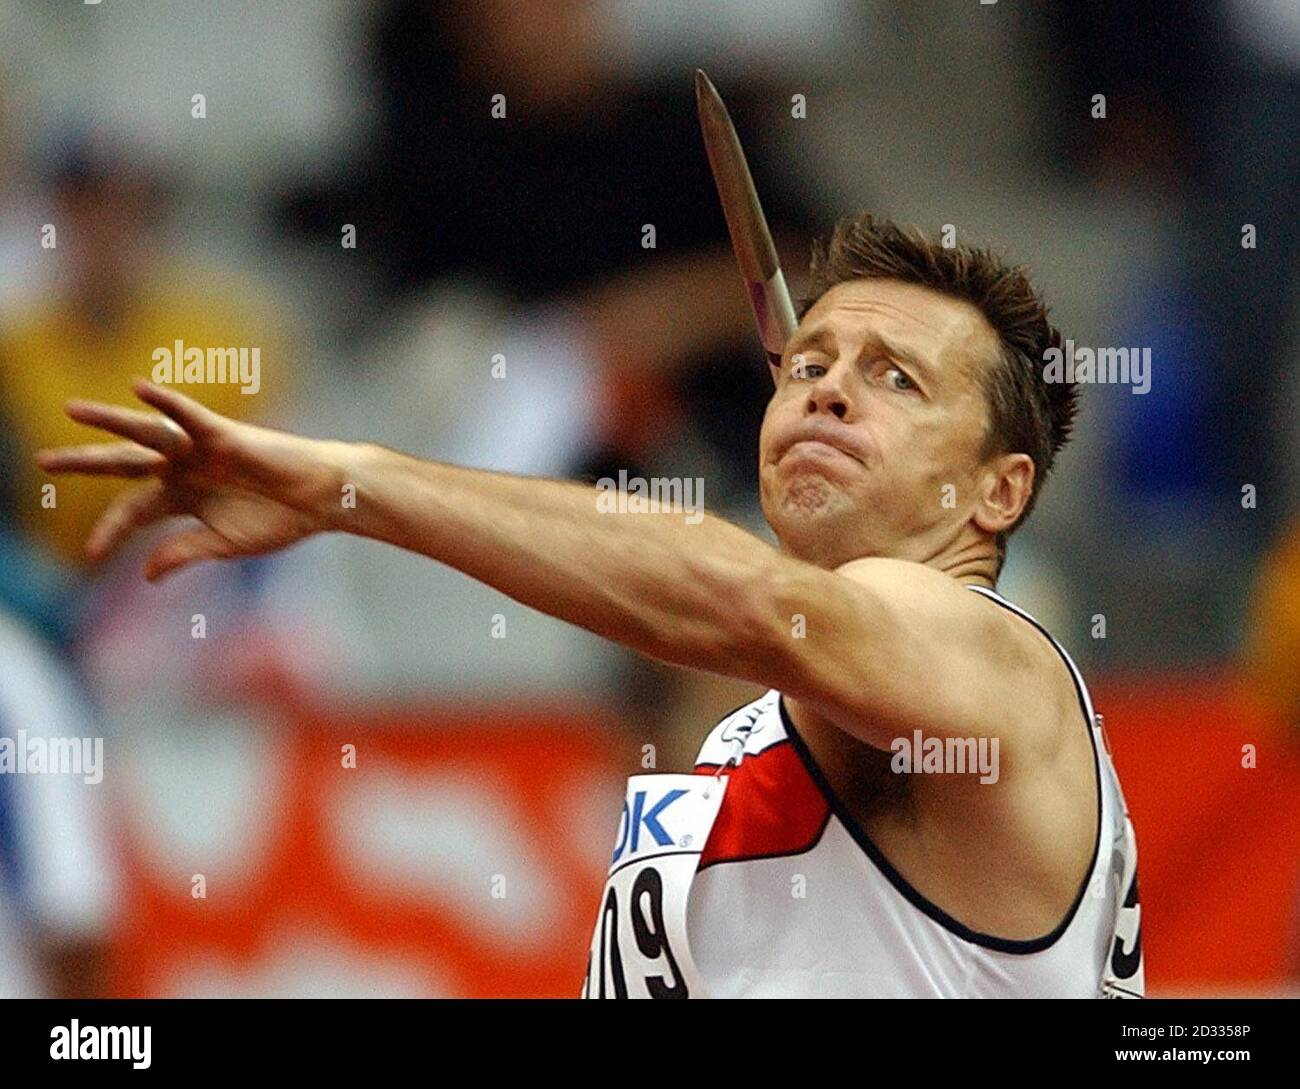 Great Britain athlete Steve Backley throws the javelin in the qualifying round of his event at the World Athletics Championships in Paris. Stock Photo